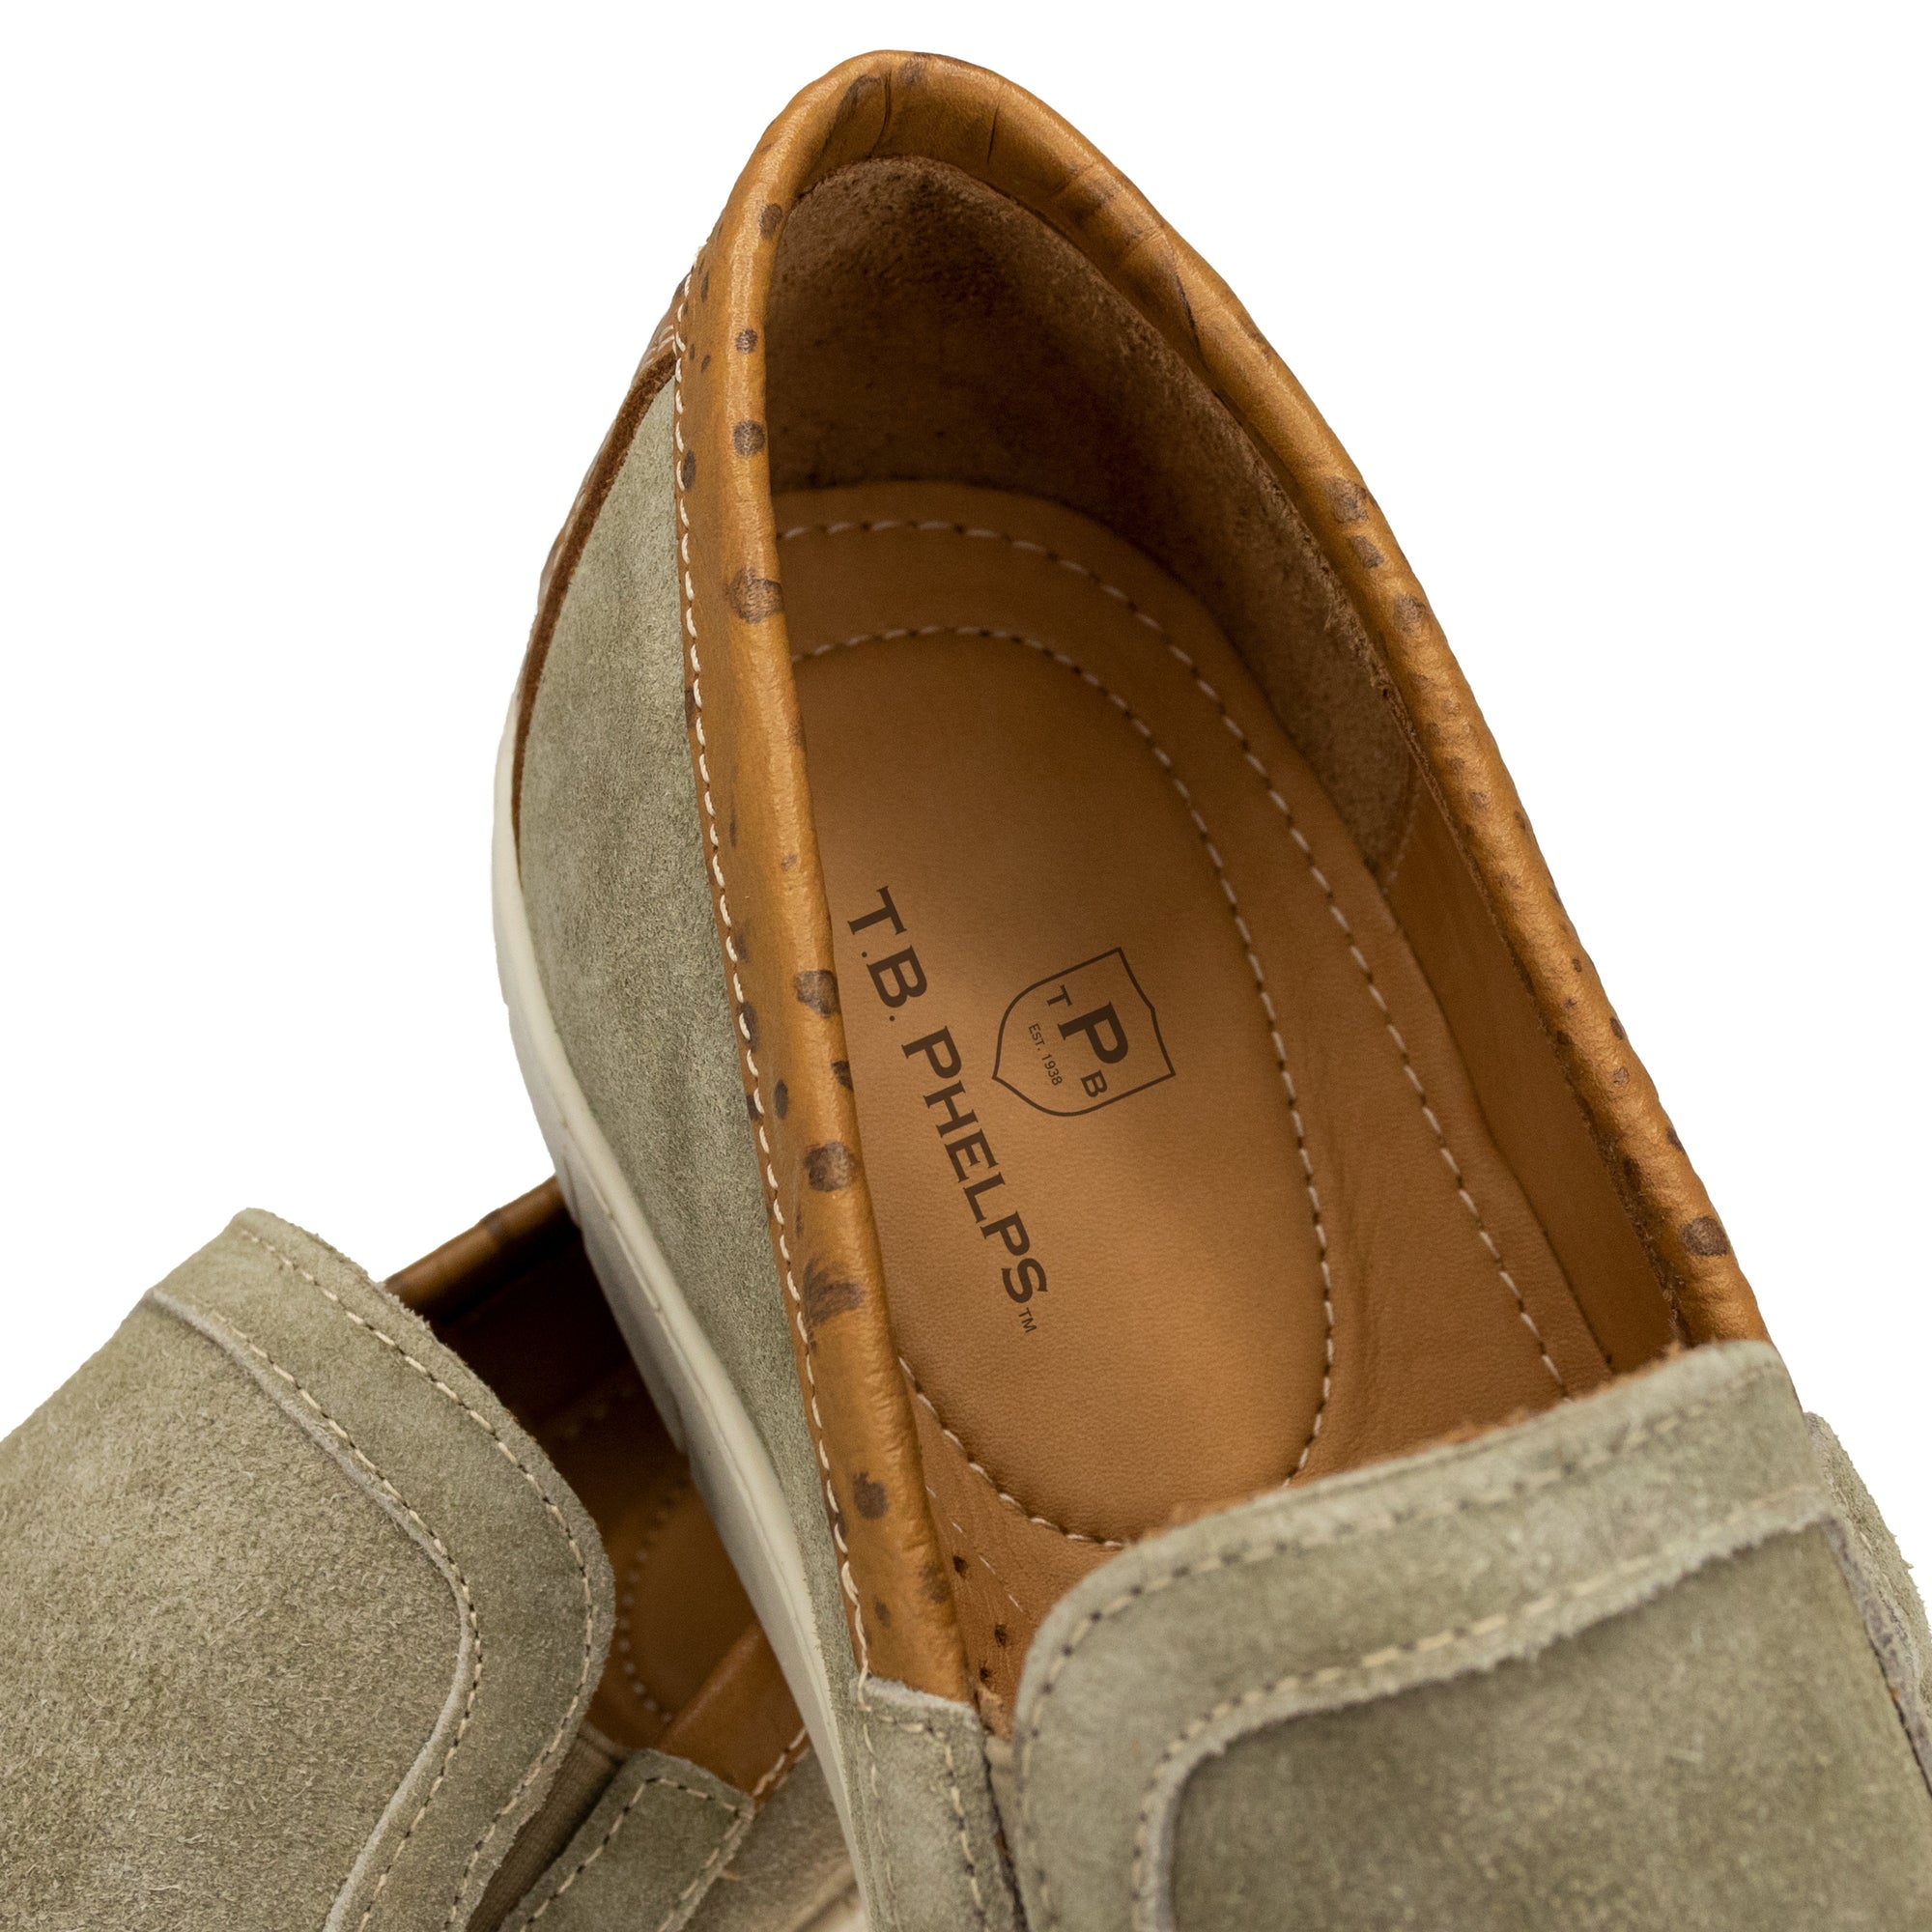 Scottsdale Slip on in Grey Suede by T.B. Phelps